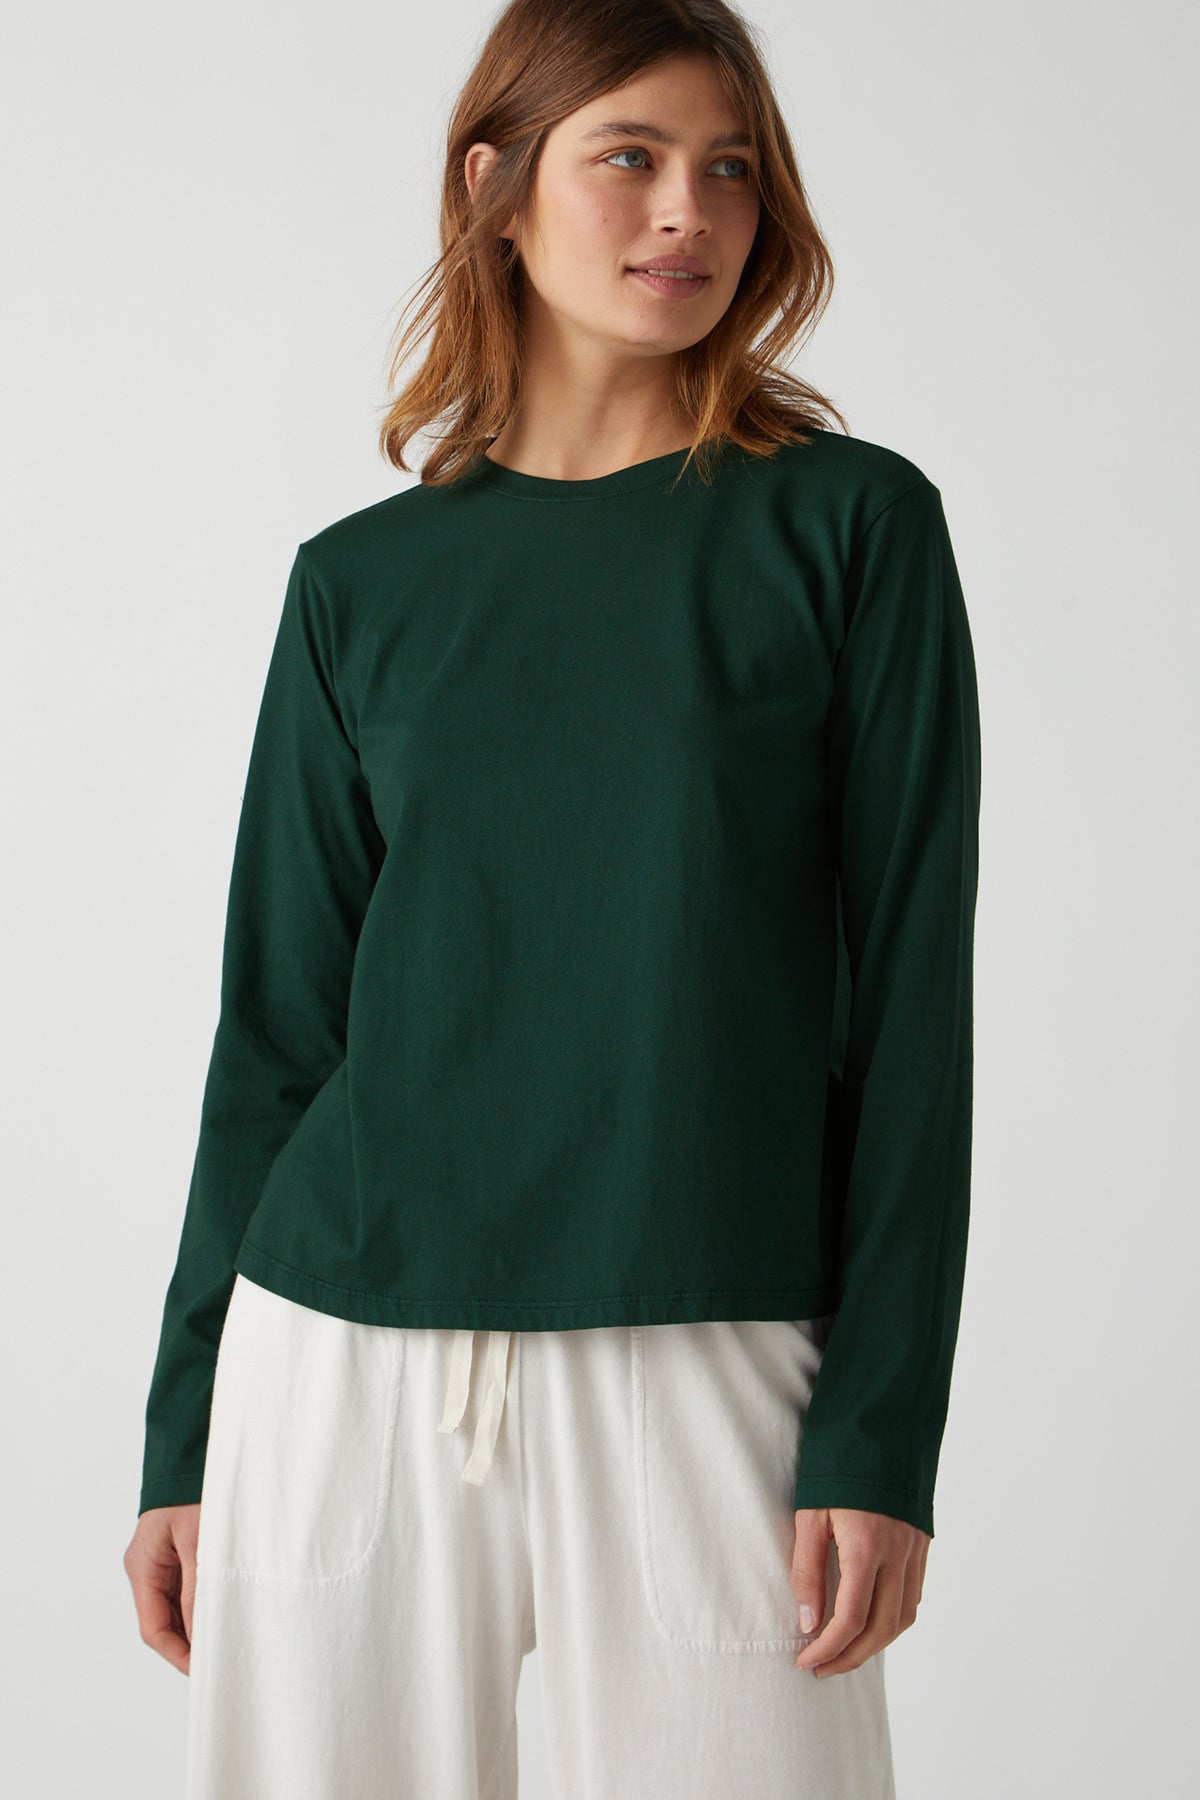 Vicente Tee in forest green front-25484347146433